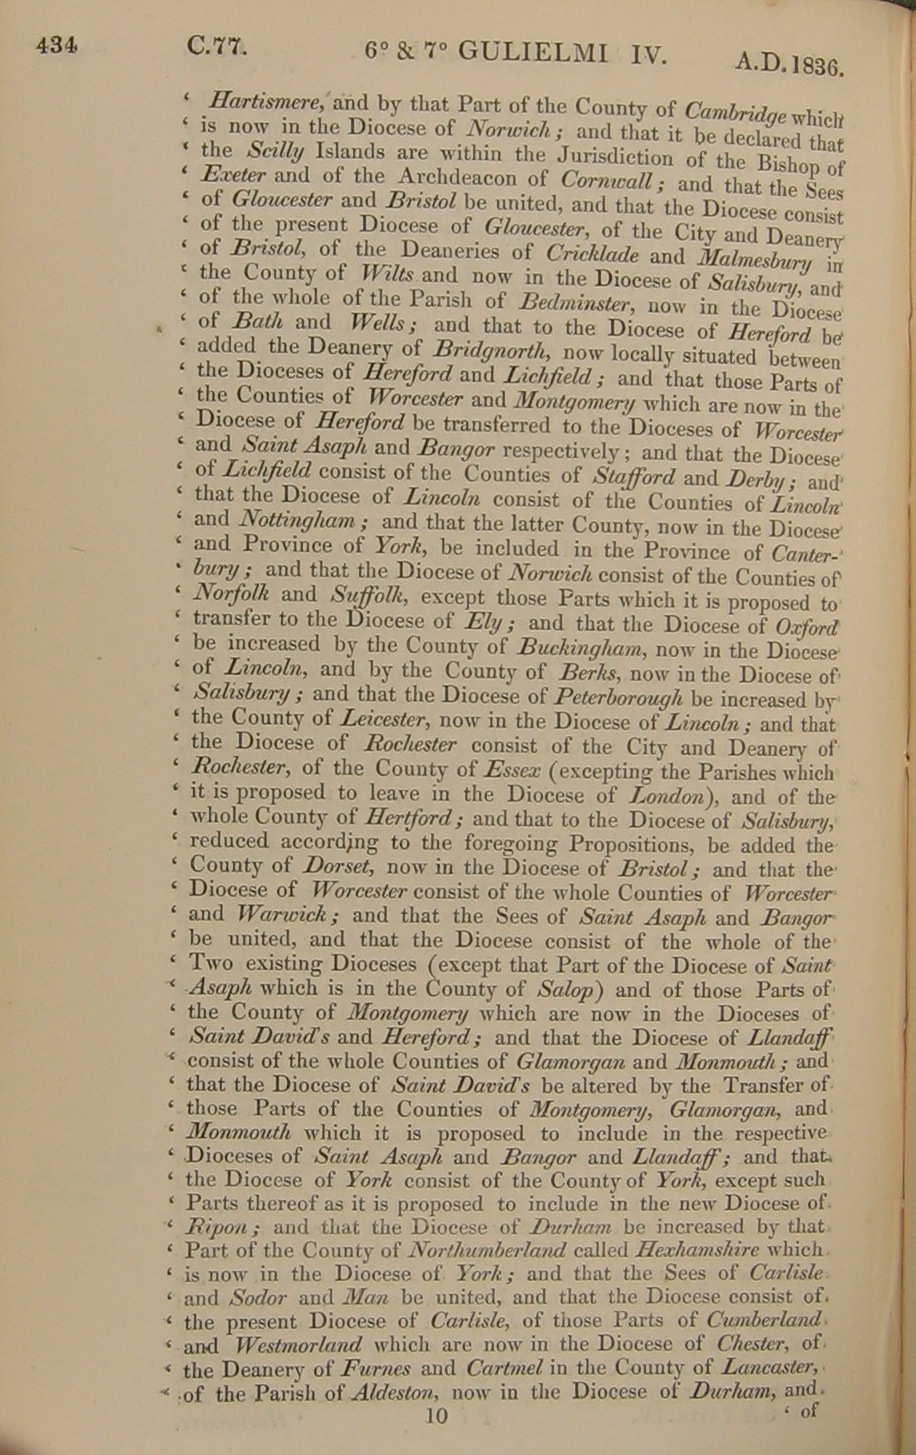 Image of 6 & 7 William IV, c. 77 (page 3 of 12). Click for larger image.